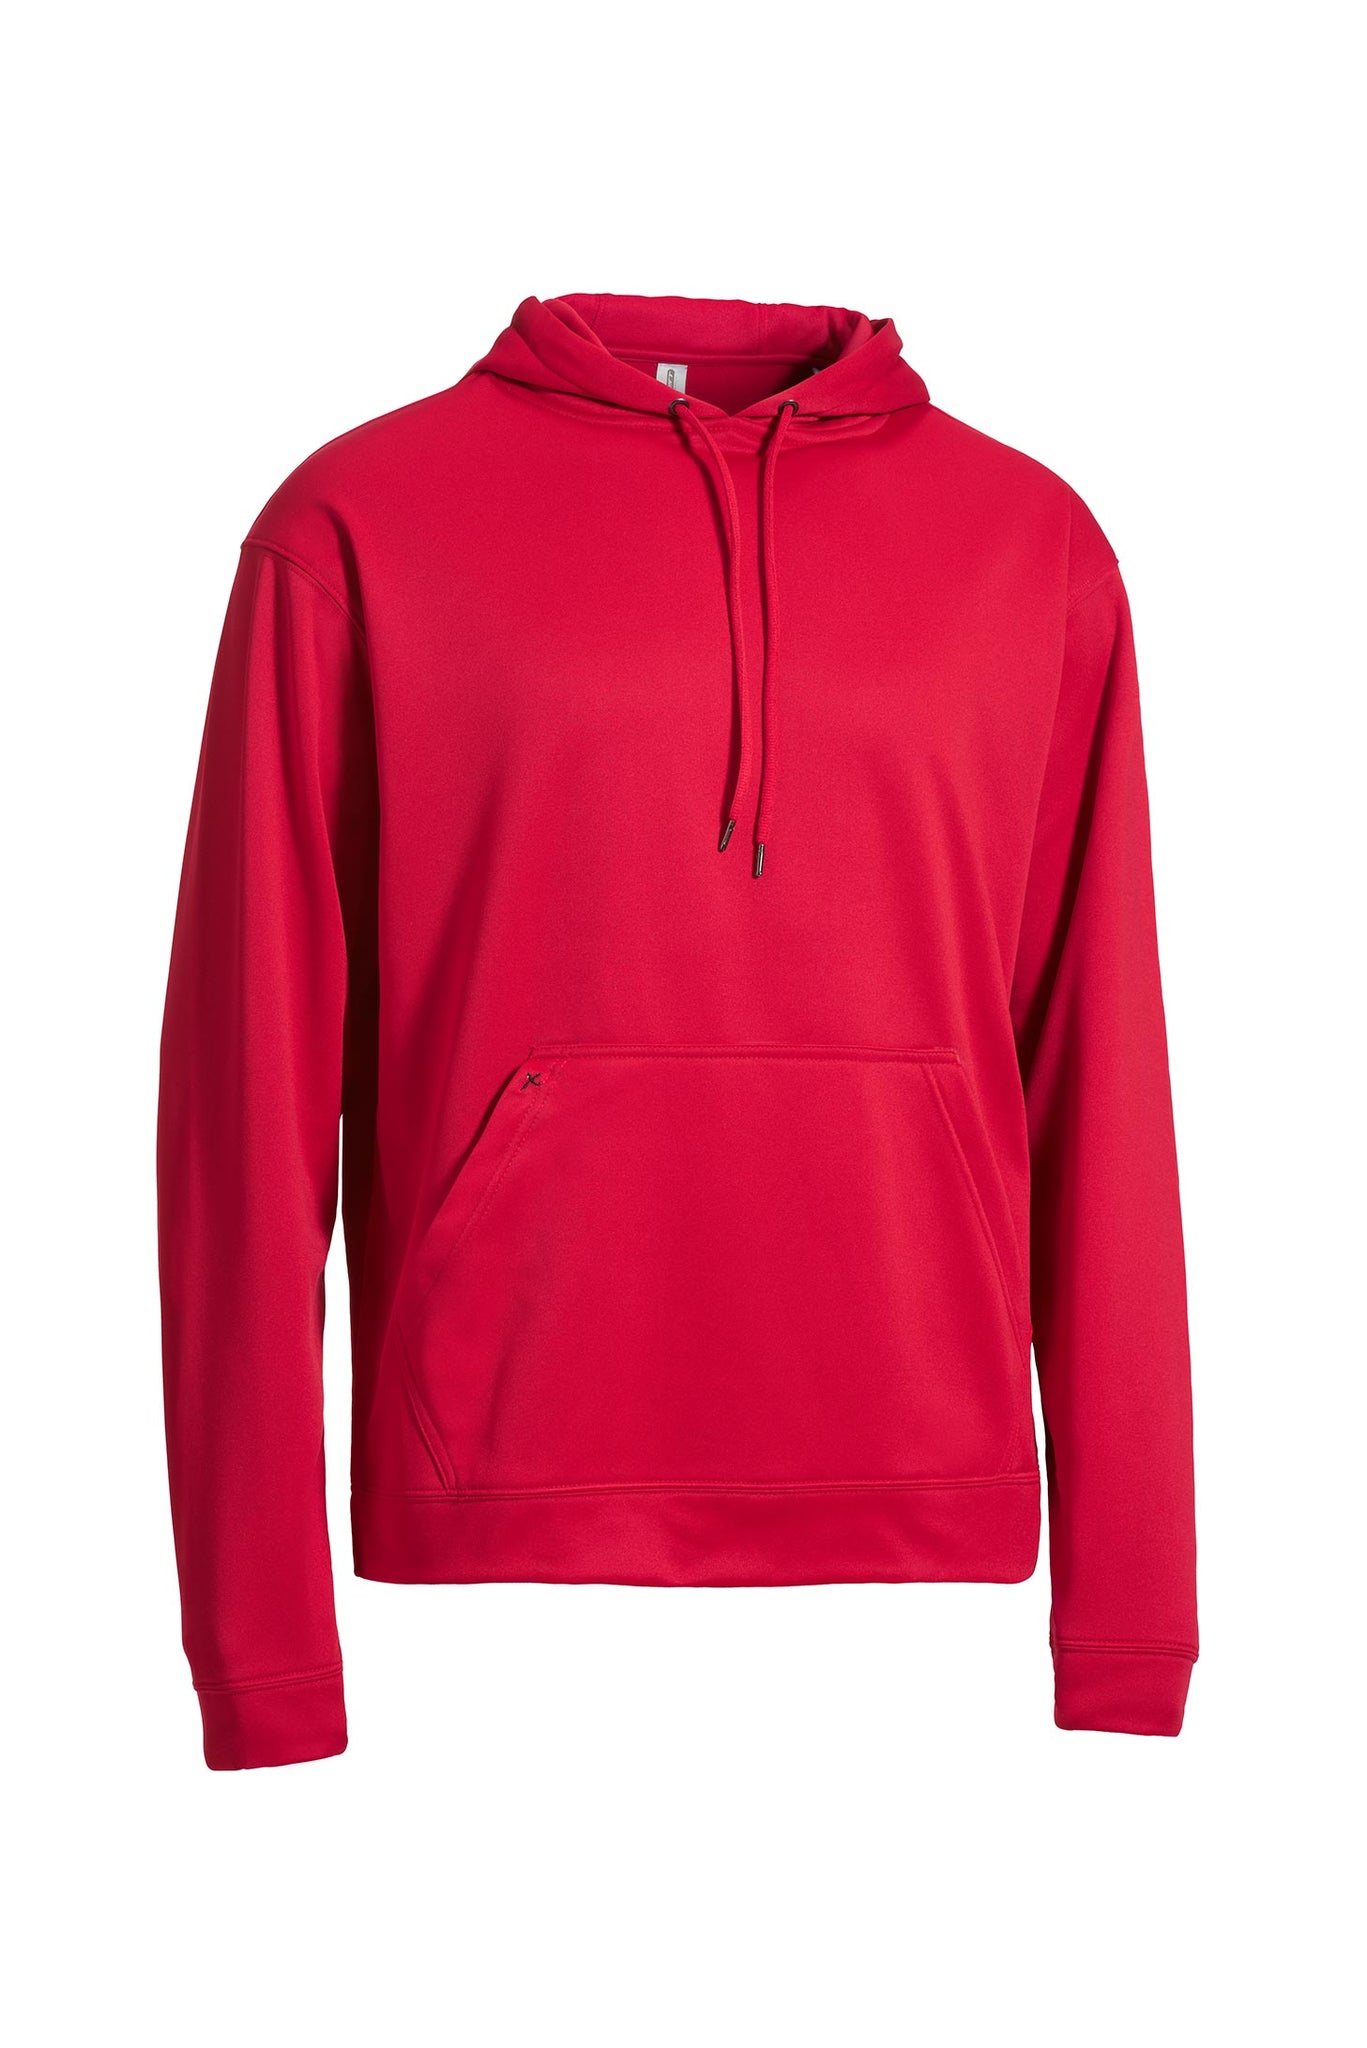 Expert Brand Wholesale Fleece Tech Pullover Hoodie BB910 Red#red